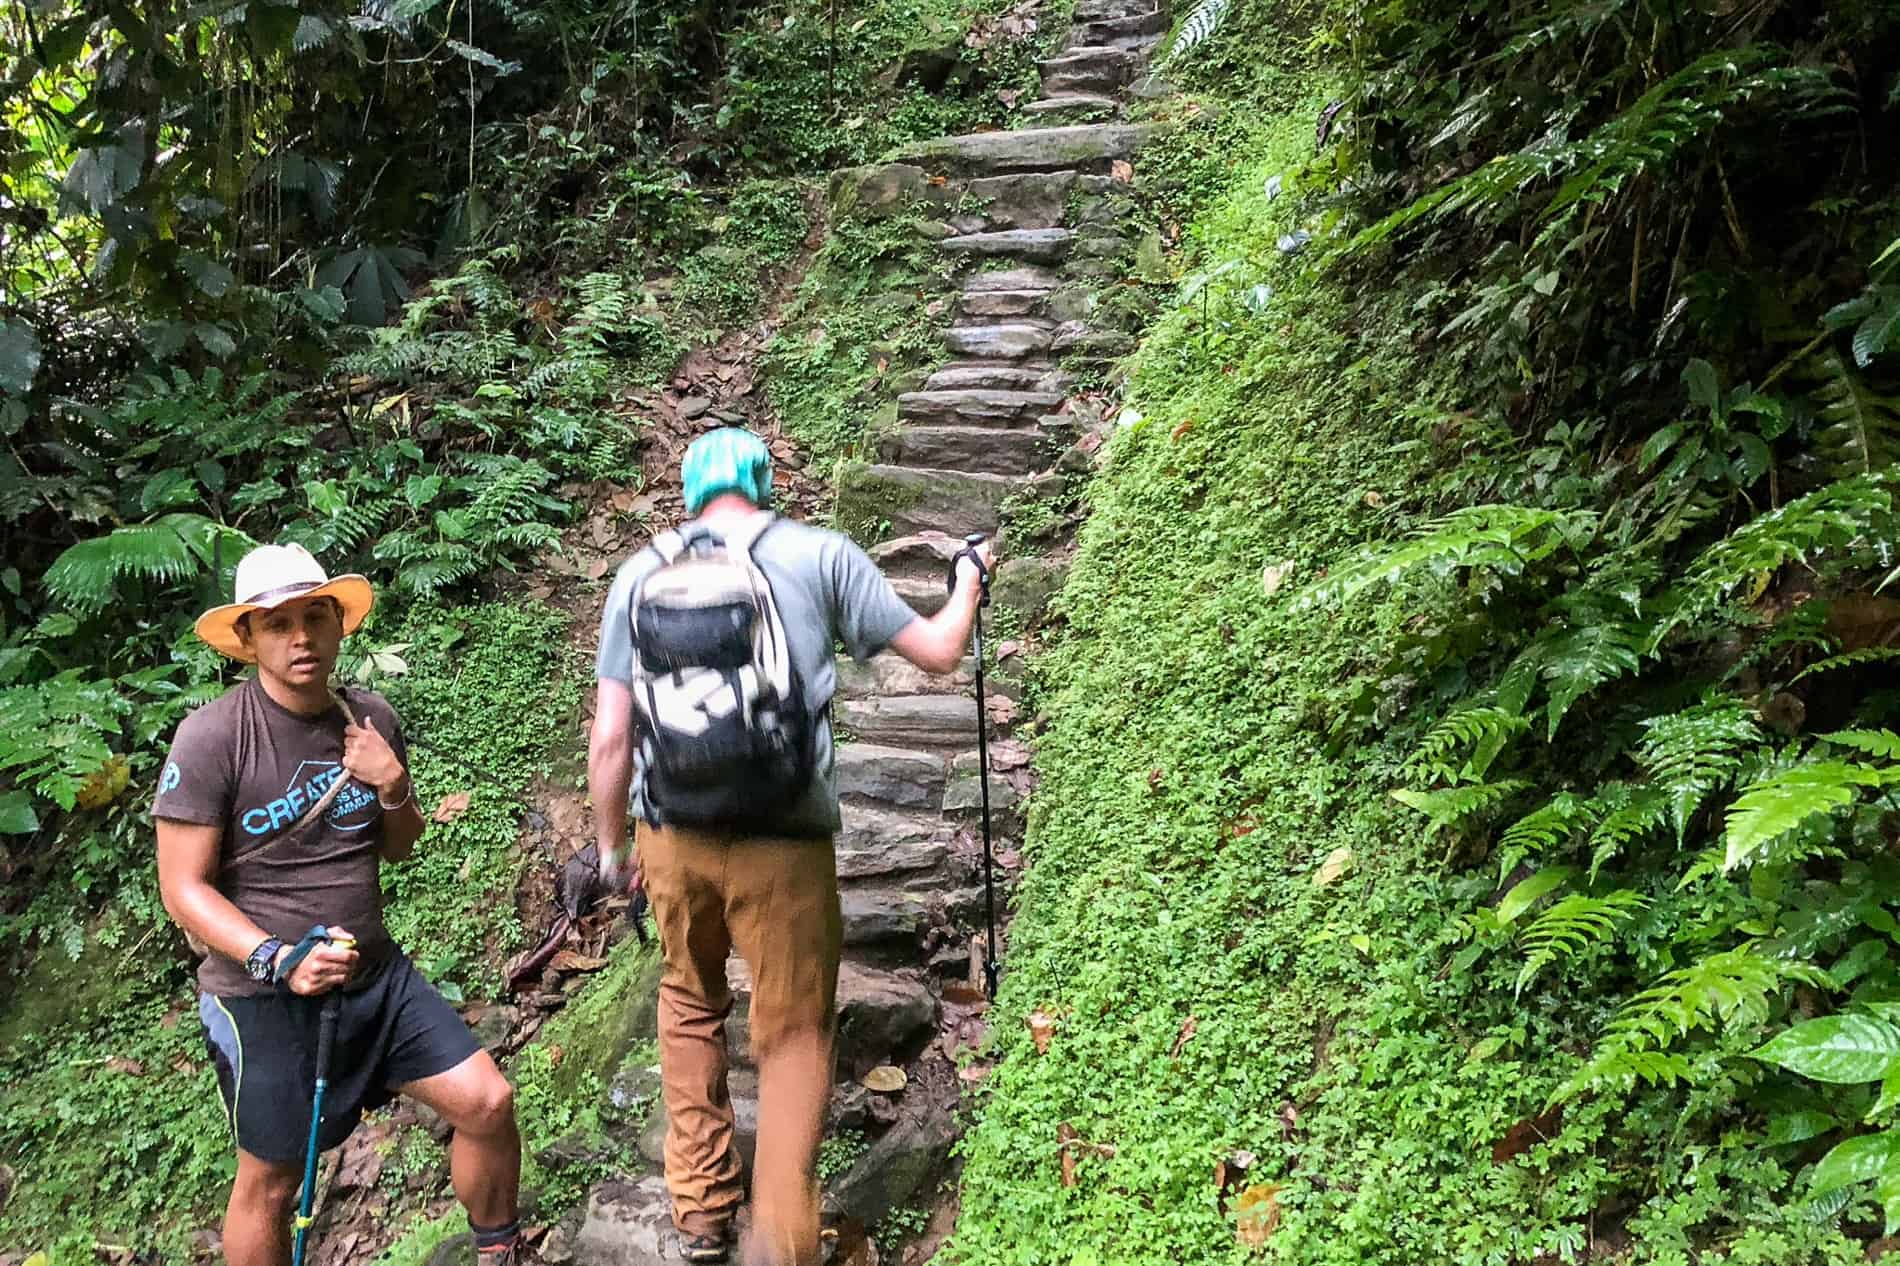 A trekker climbing the 1,200 stairs to the Lost City in Colombia.